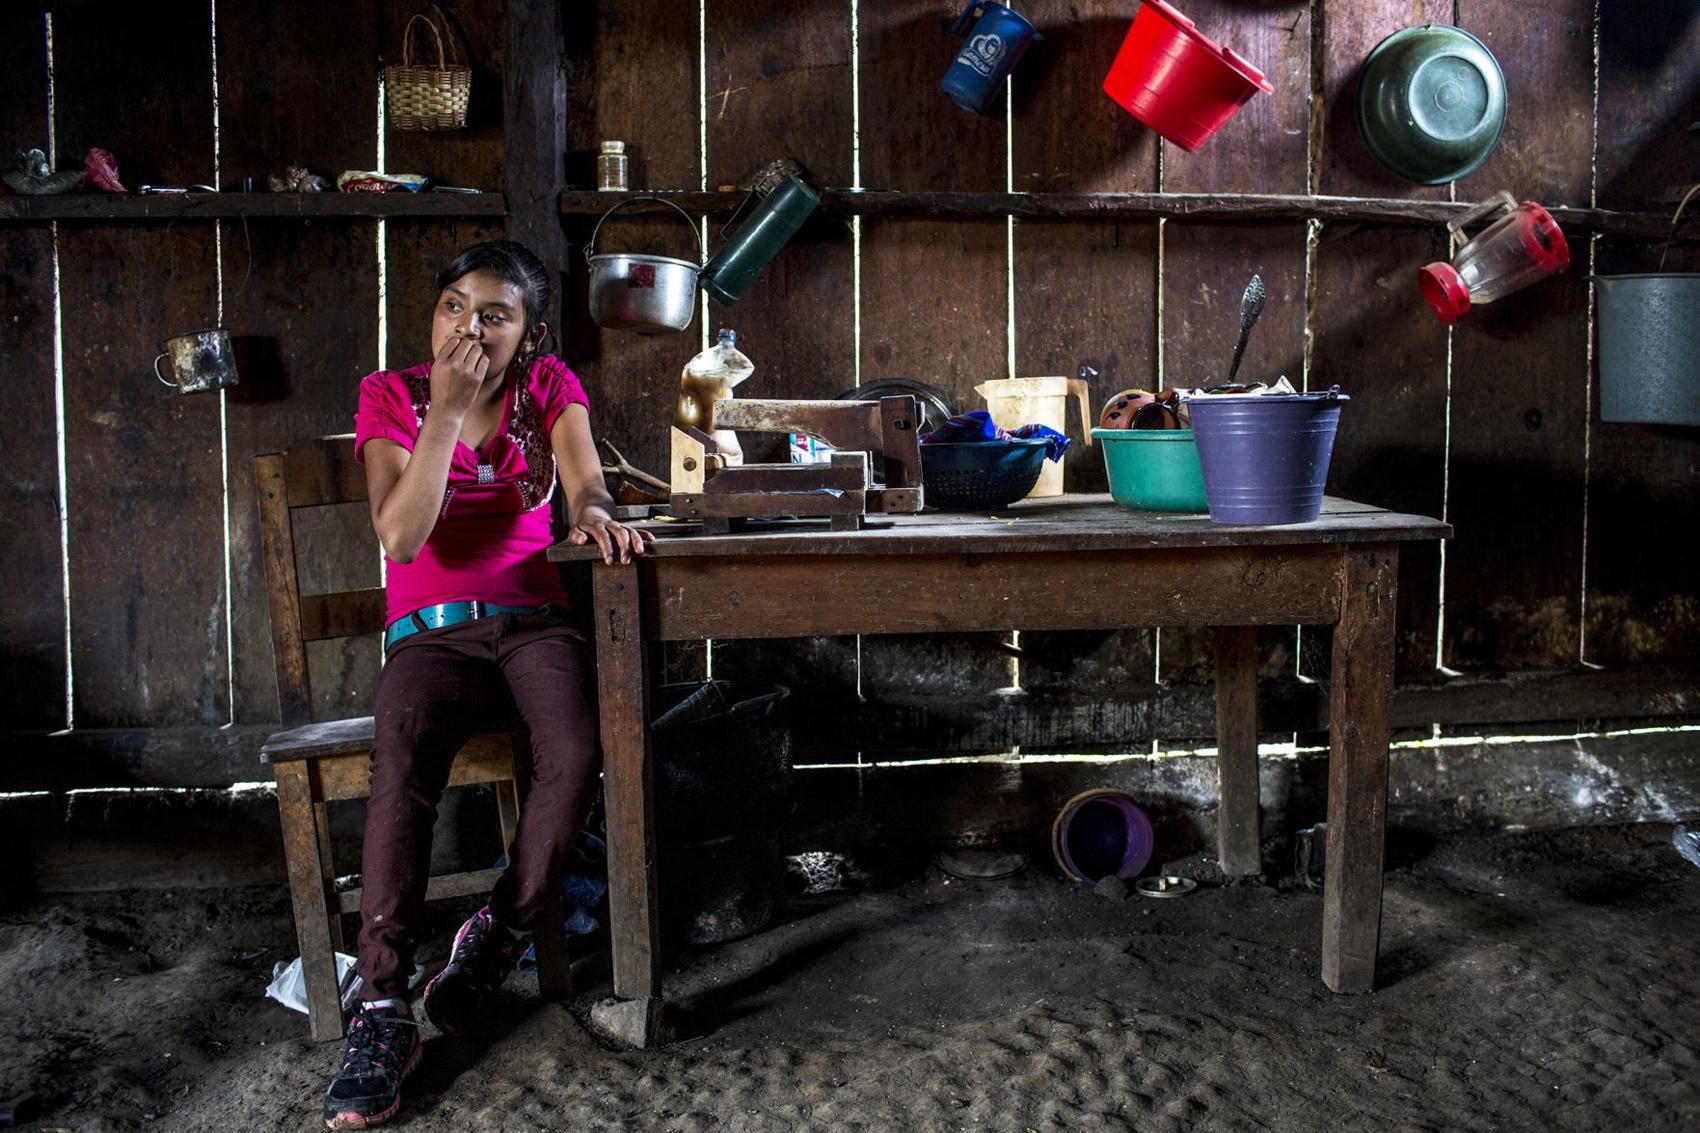 Candelaria López, 15, at home in Yalambojoch, stays at home to help raise her siblings. She no longer goes to school because her family can’t afford to pay the $60 school fee. Image by Simone Dalmasso / The Arizona Daily Star. Guatemala, 2019.
